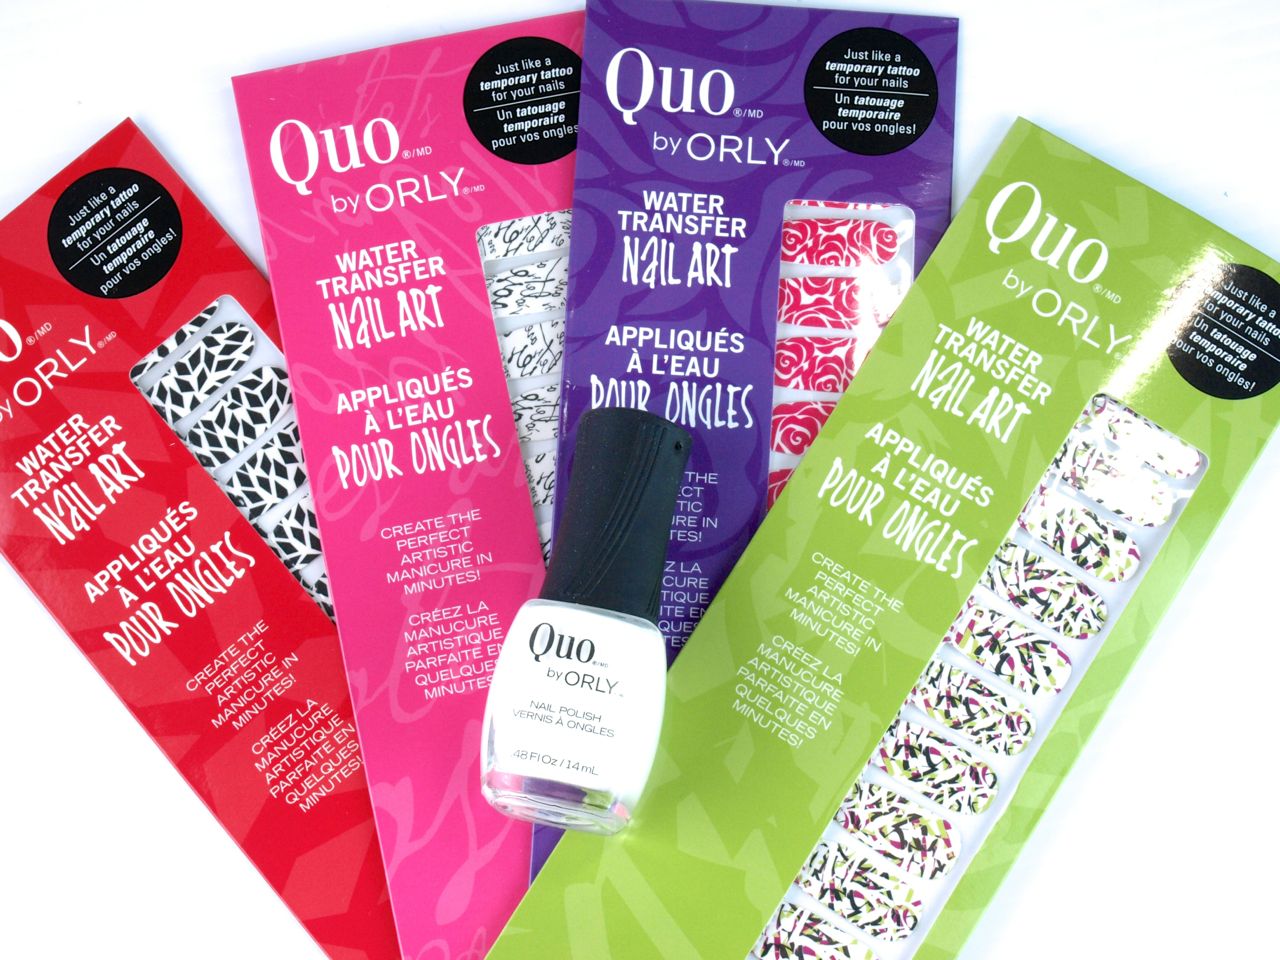 Quo by Orly Water Transfer Nail Art in "Mischief": Review and Swatches